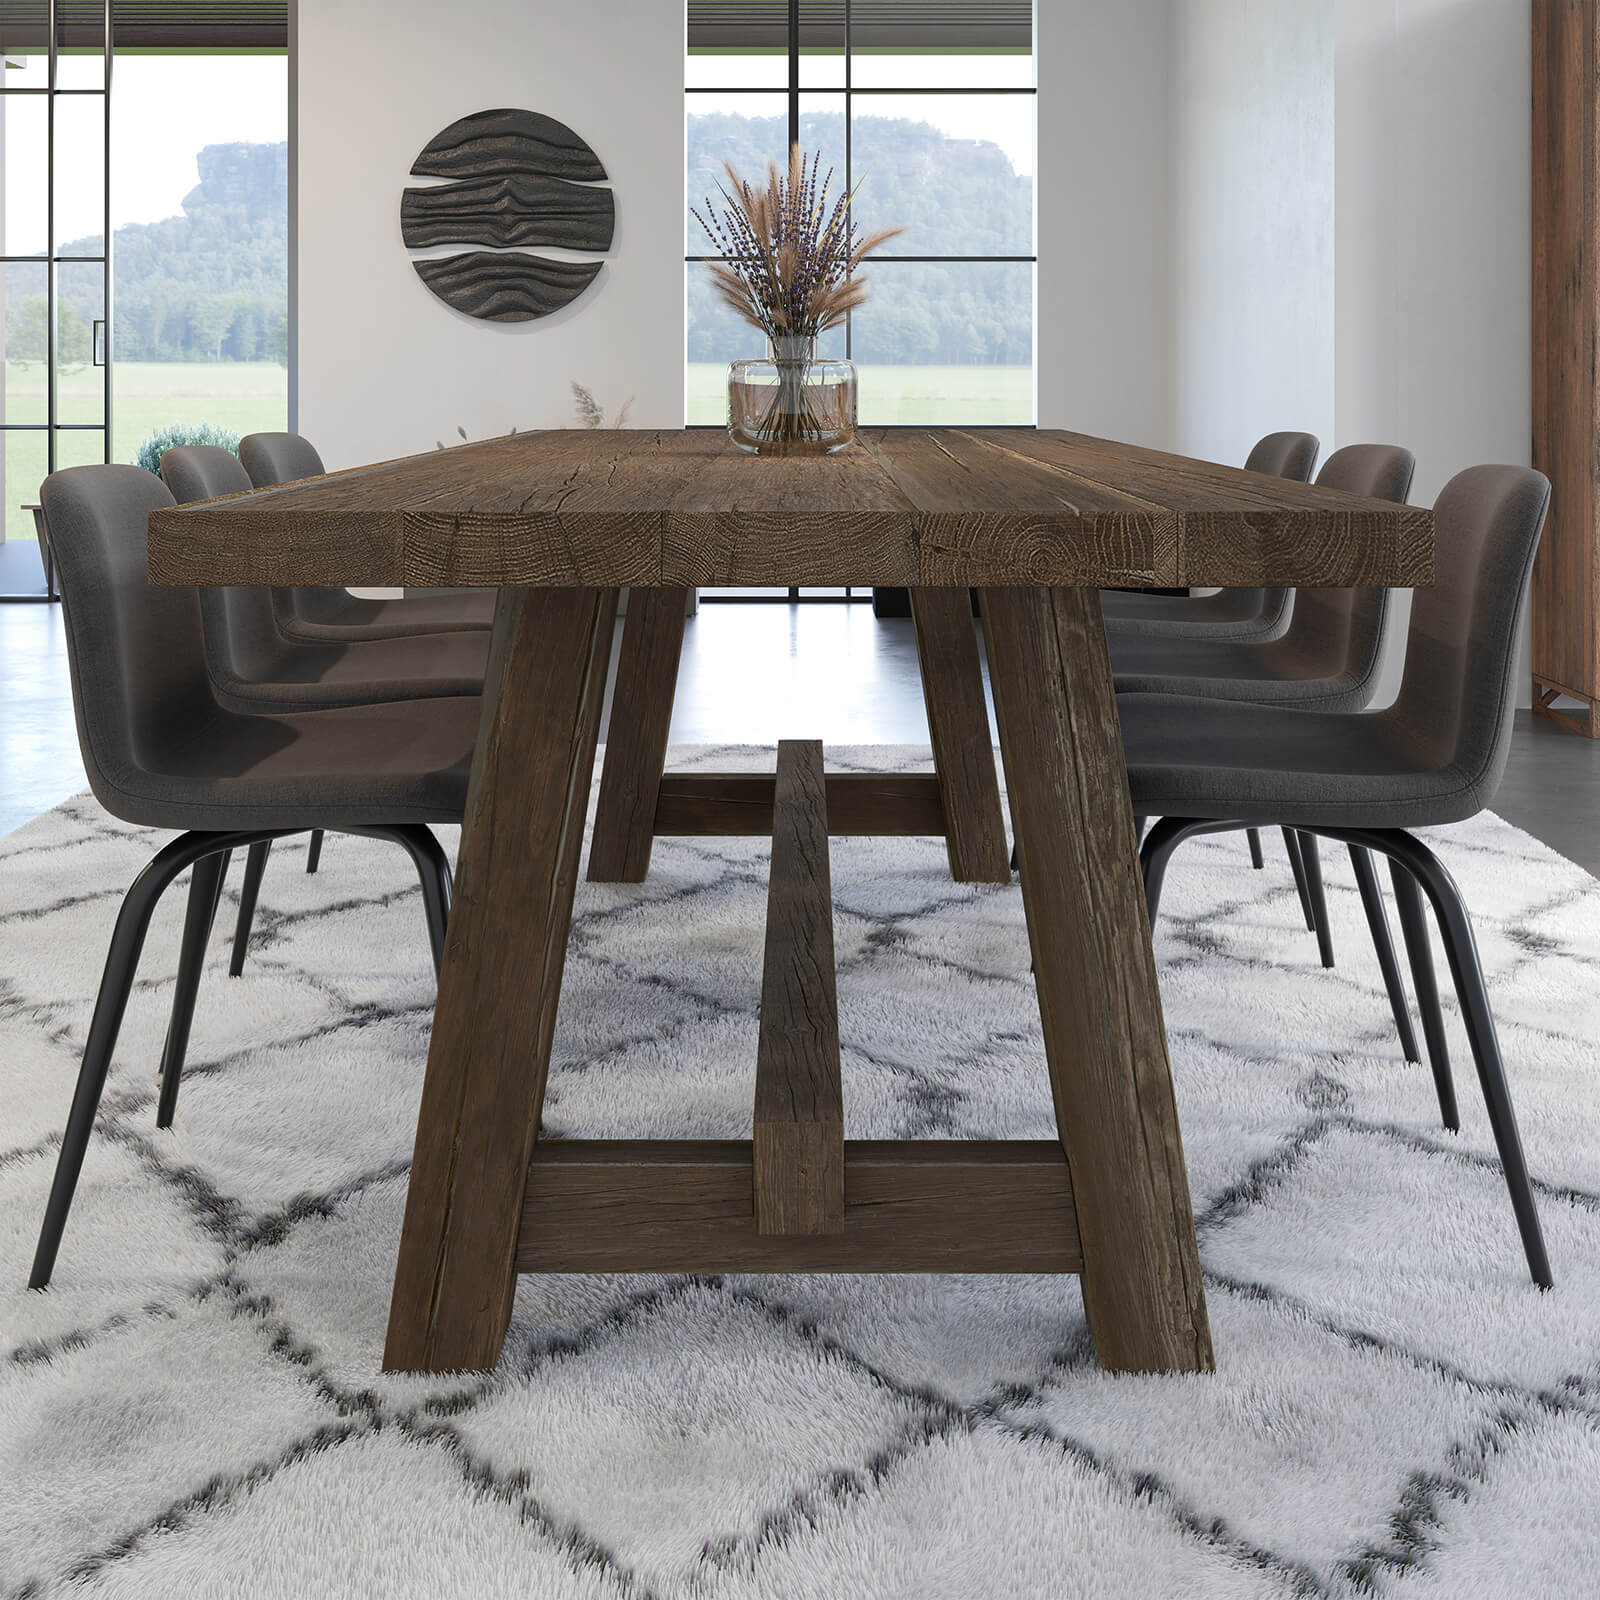 Wooden Dining Table Lifestyle 3D Rendering